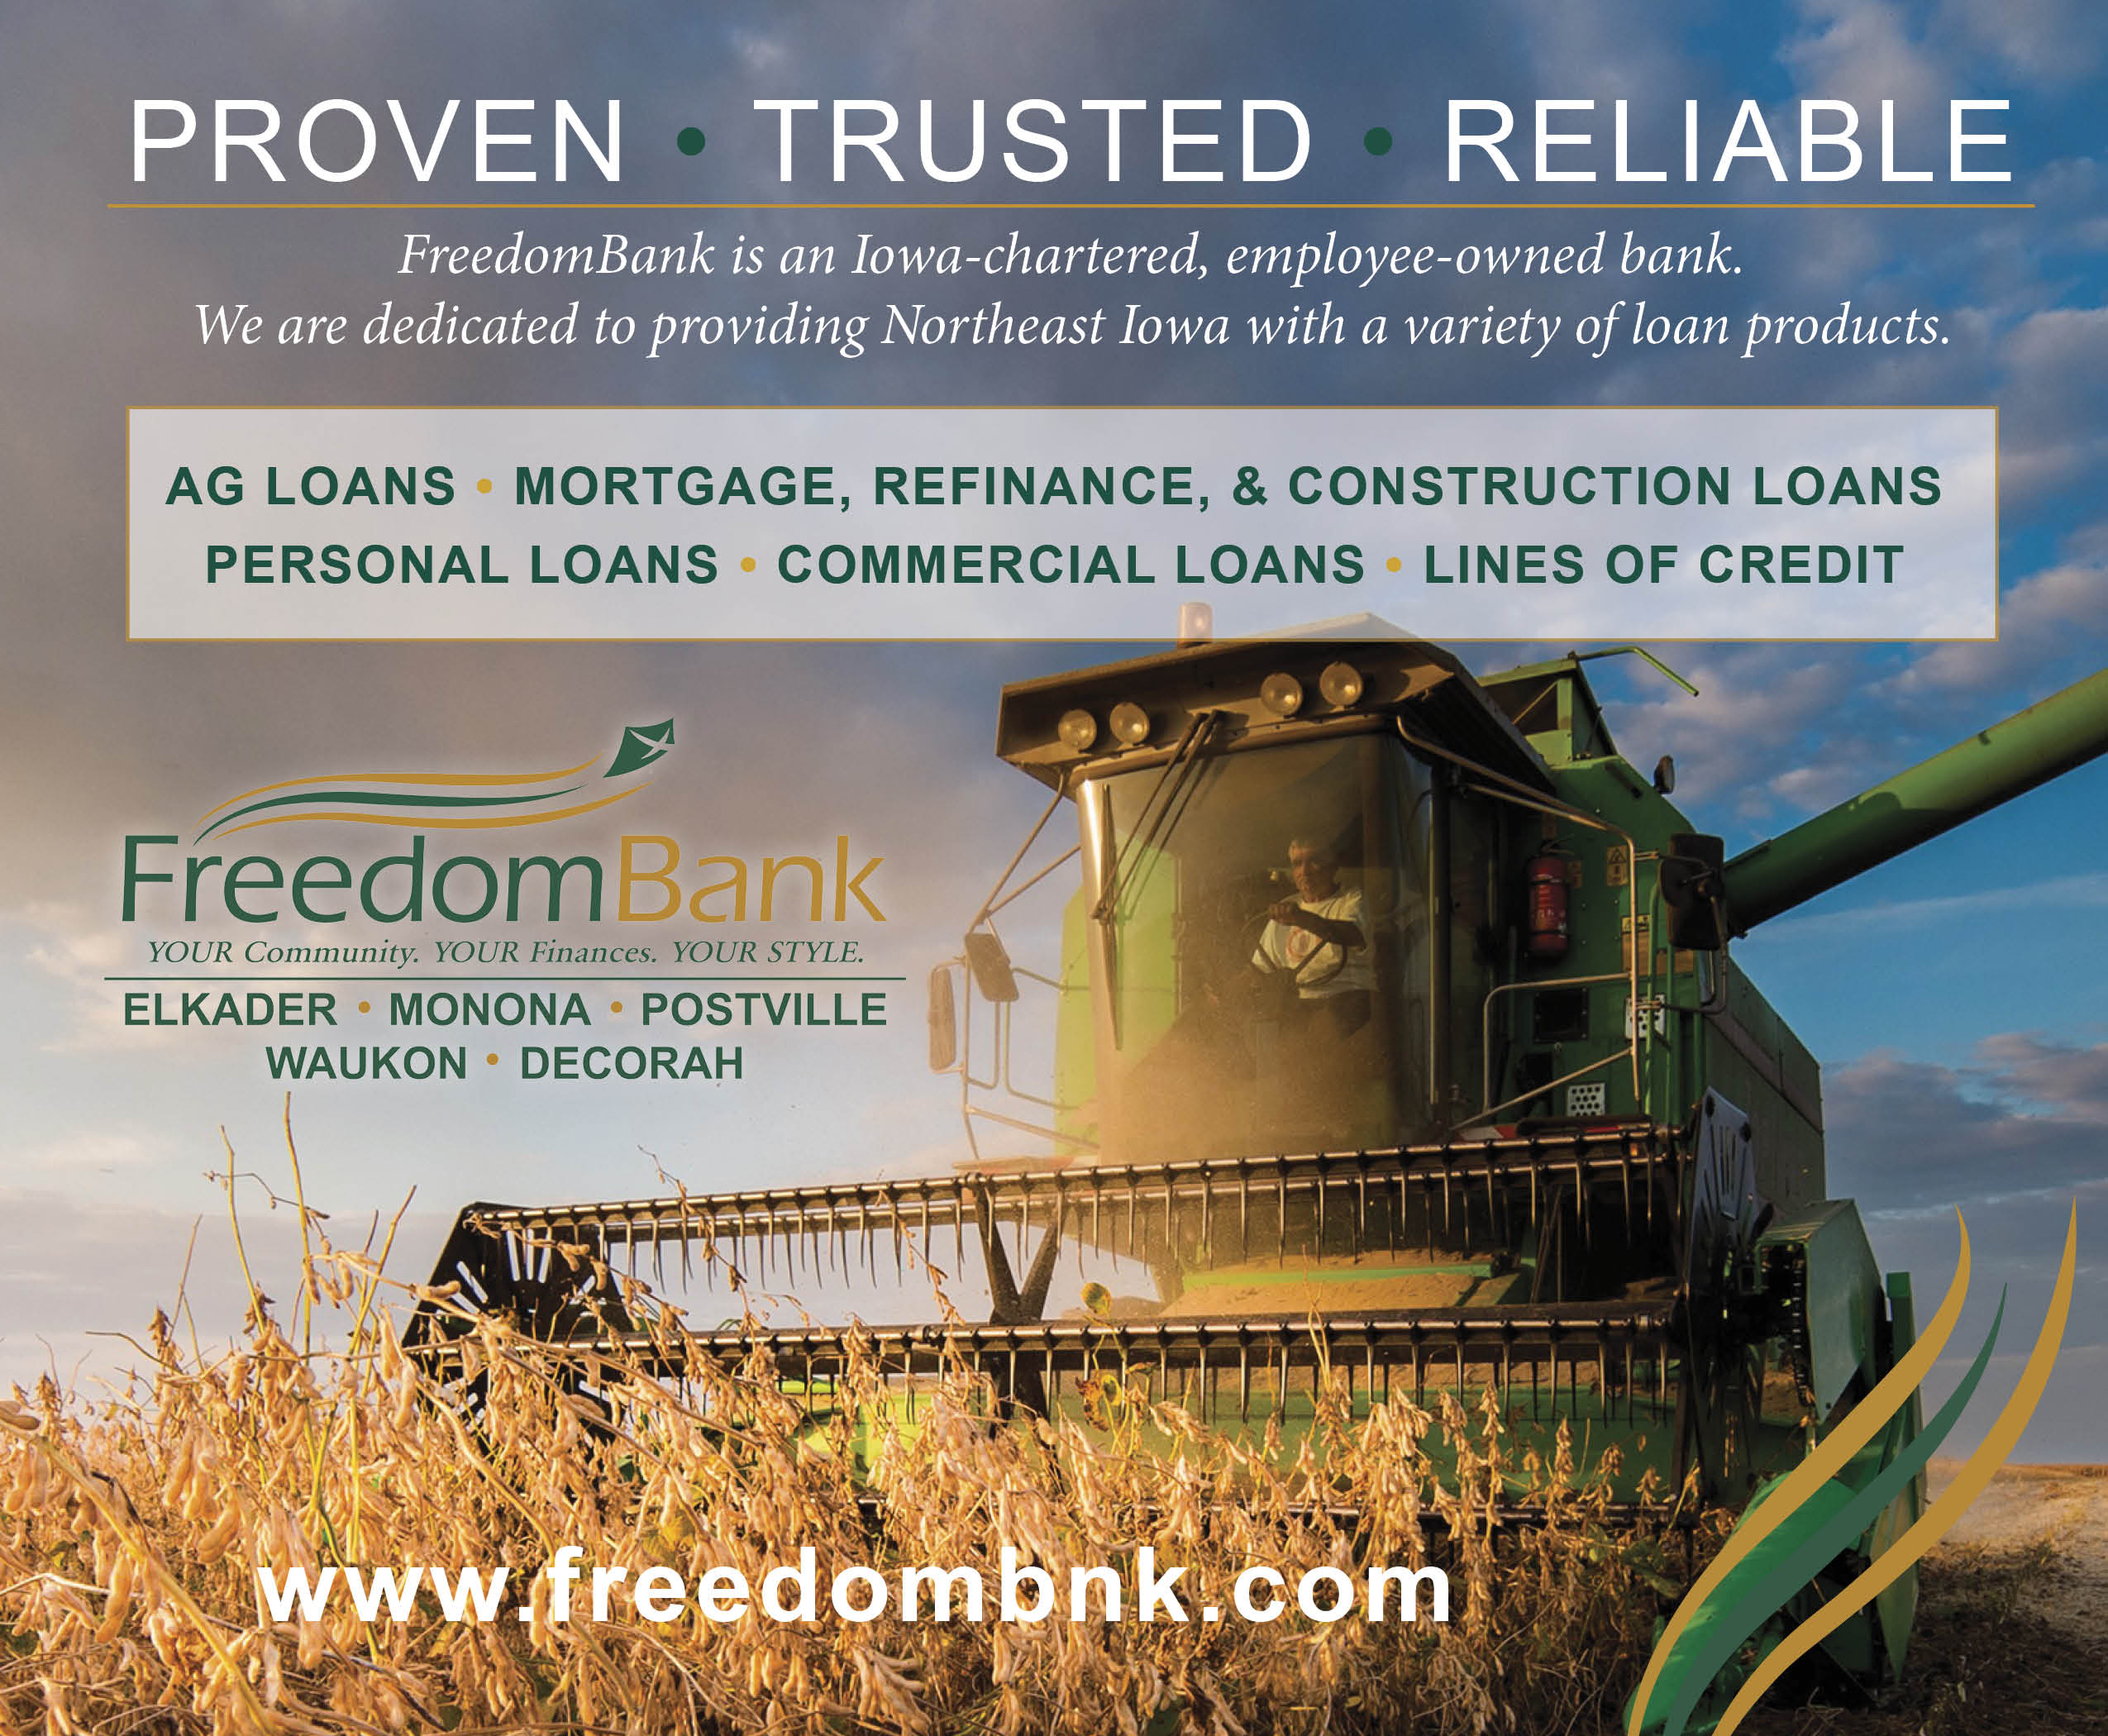 FreedomBank is an Iowa-chartered, employee-owned bank. We are dedicated to providing Northeast Iowa with a variety of loan products.